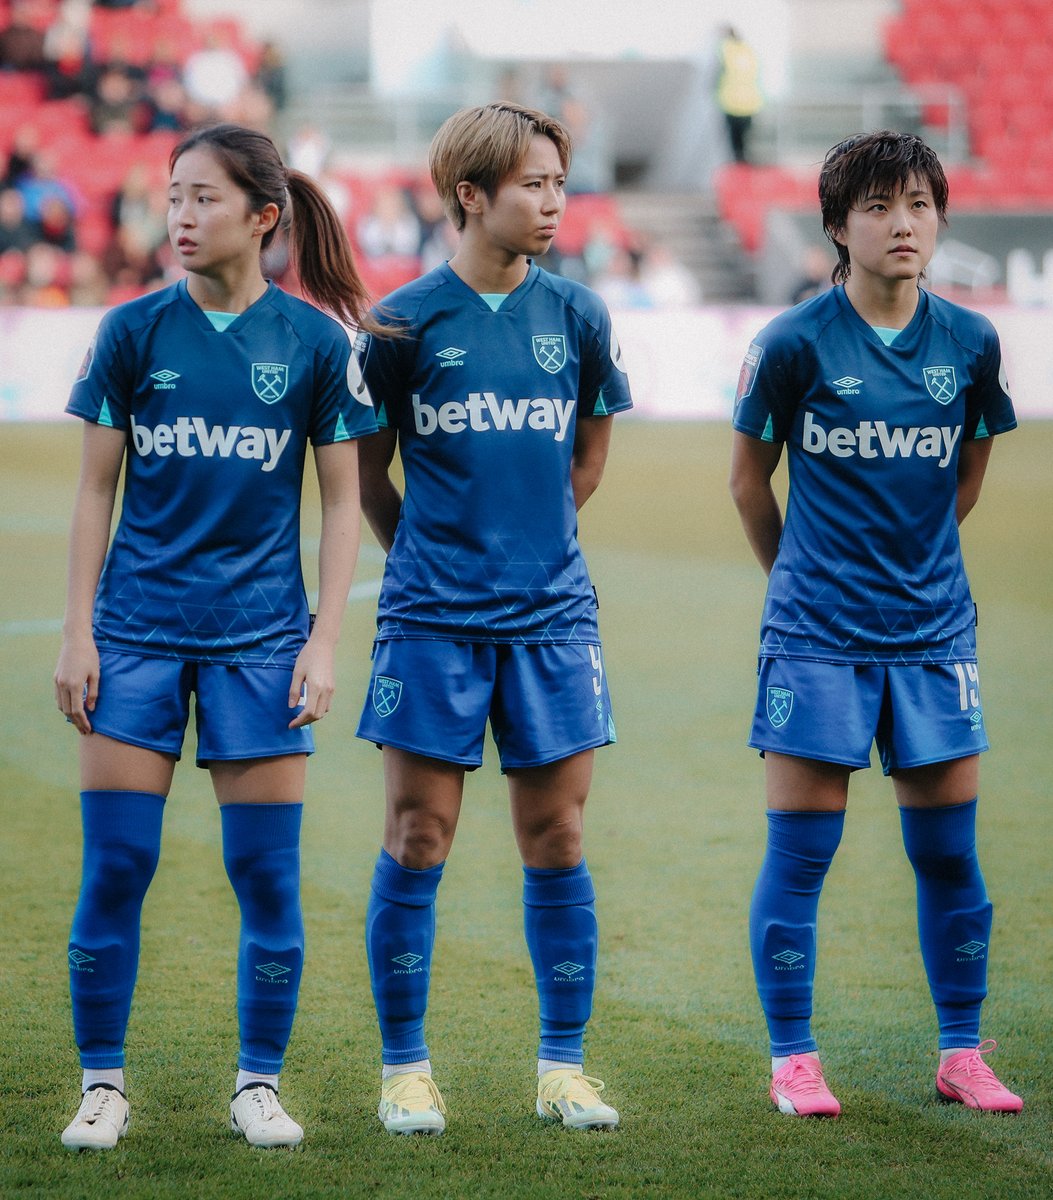 Best of luck to our Japanese trio for the squad call-up for the #Paris2024 Women's Soccer Asian Final Qualifiers! 👏🇯🇵